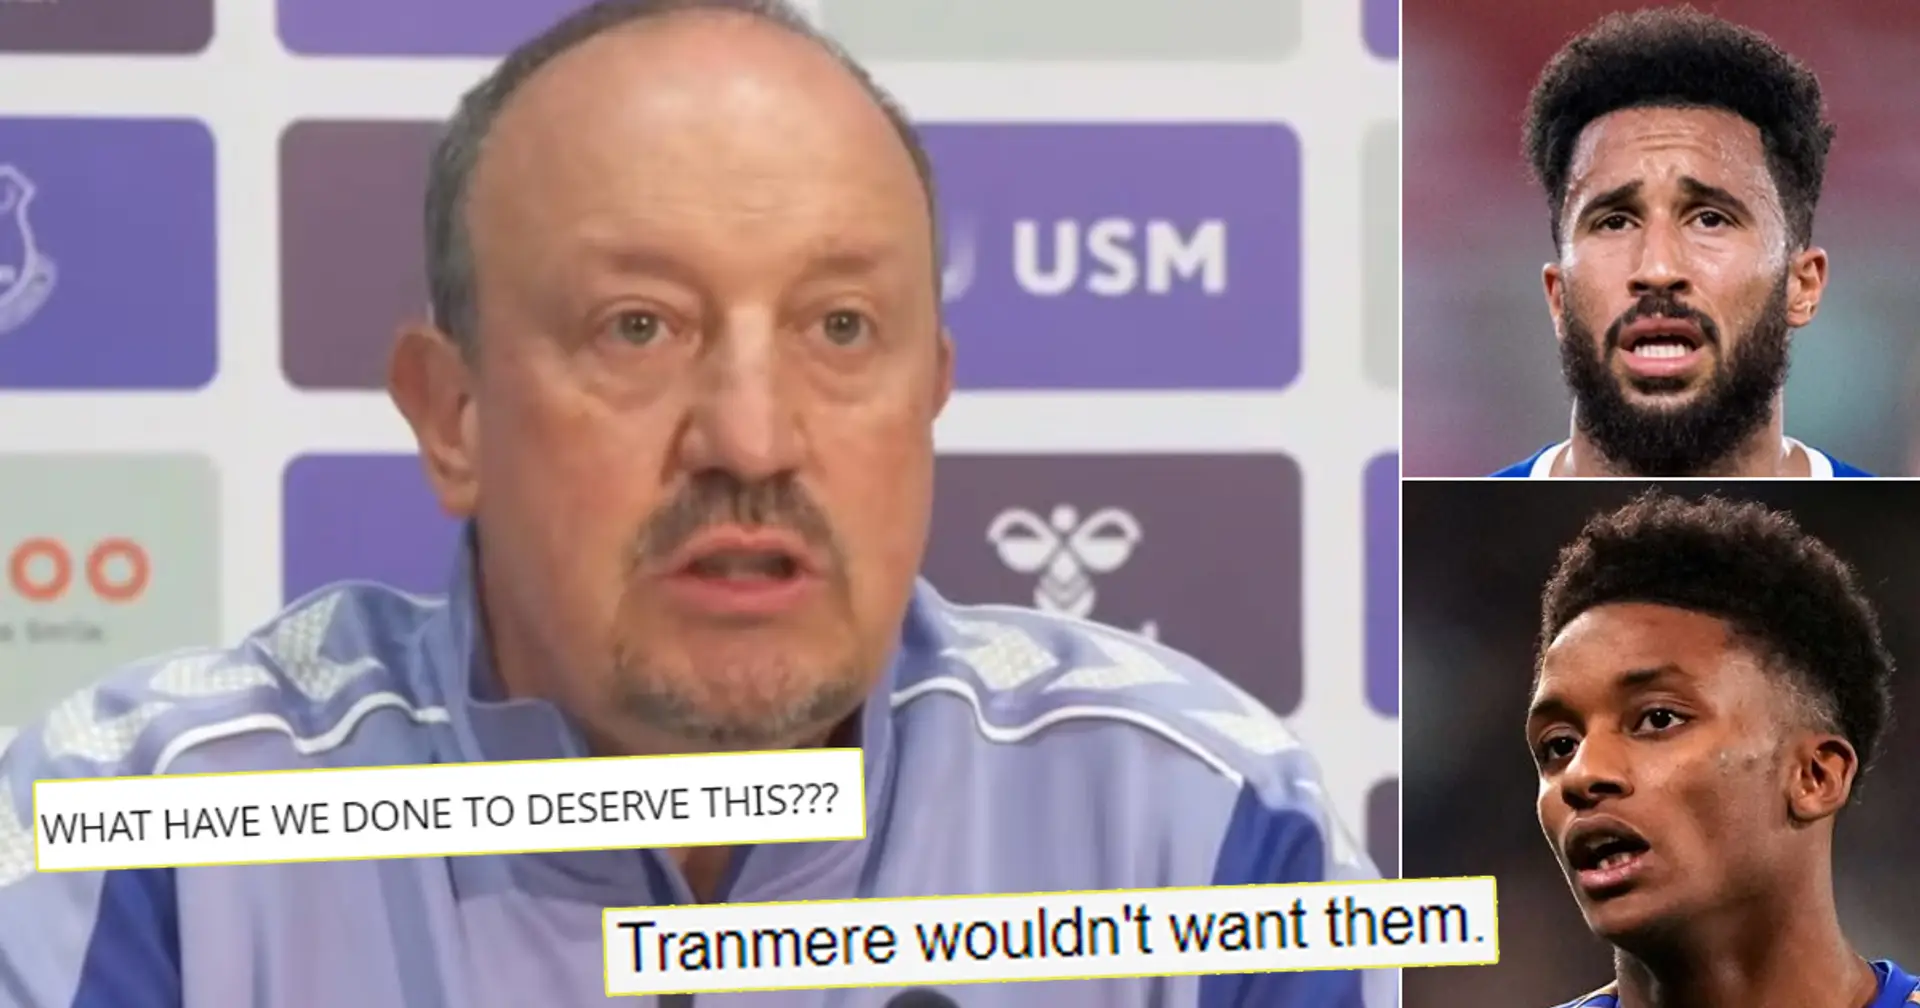 Benitez set to make 2 first signings at Everton — and even Toffees fans think club is 'laughing stock'